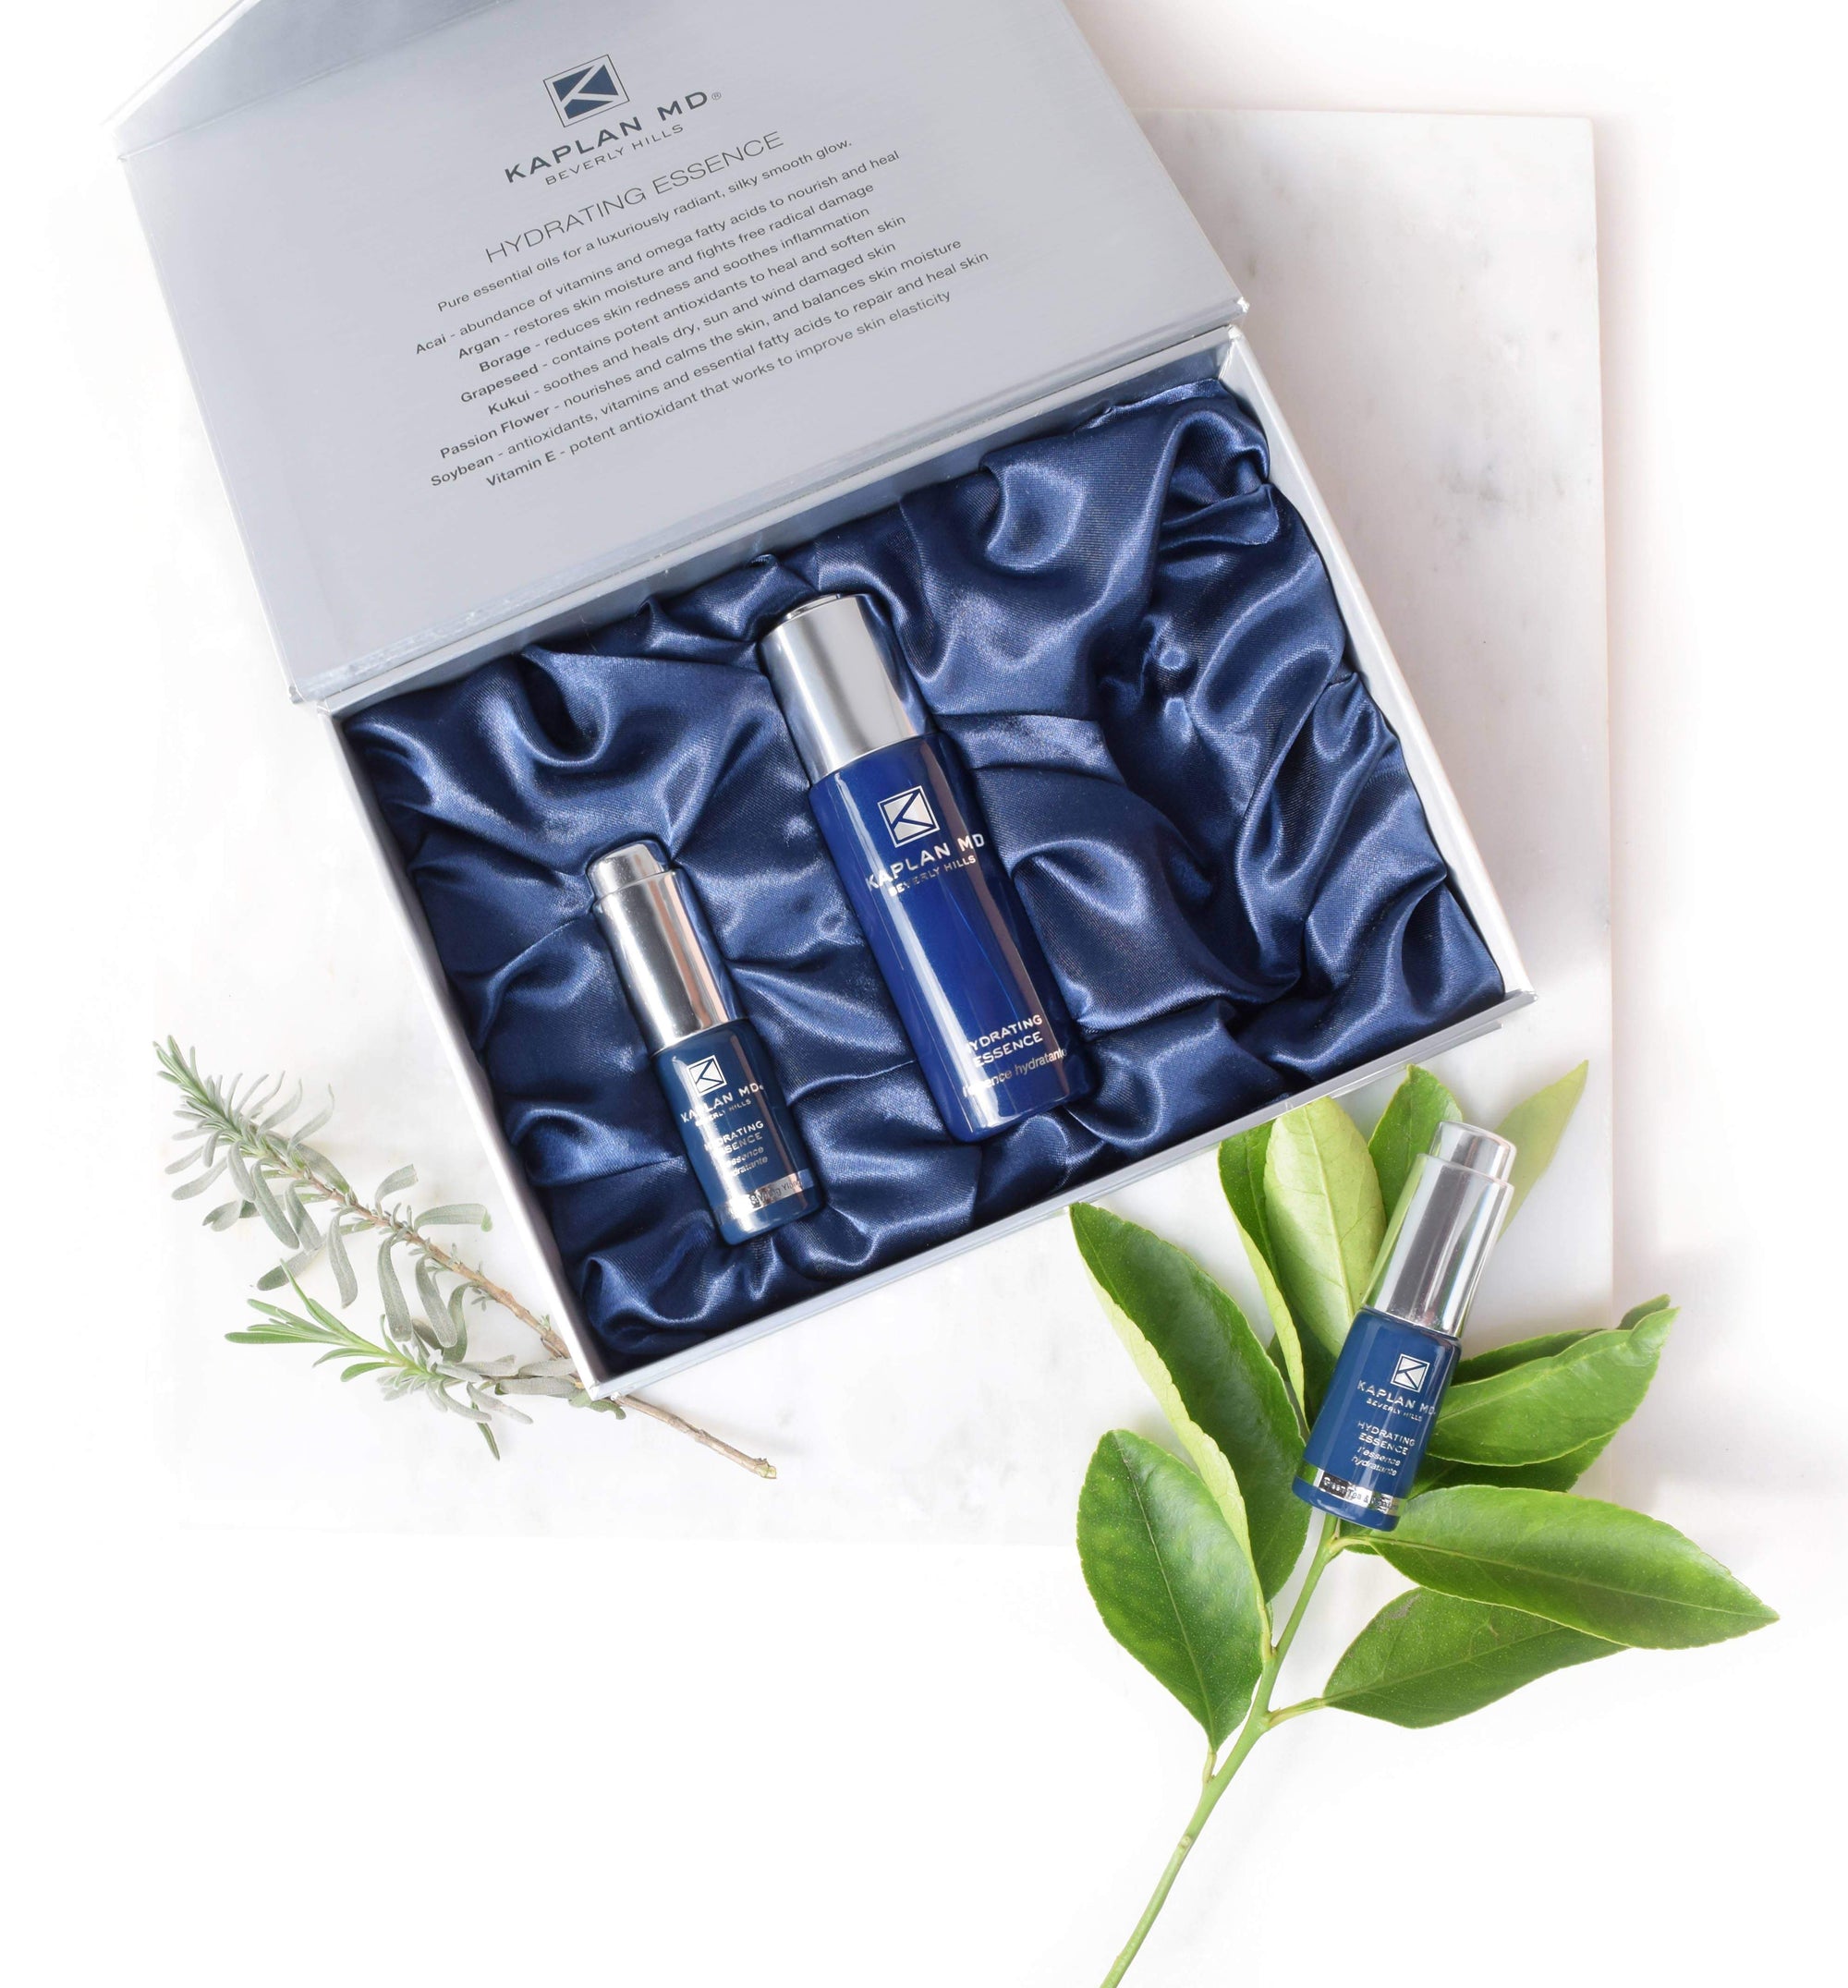 INTRODUCING...The Hydrating Essence Set